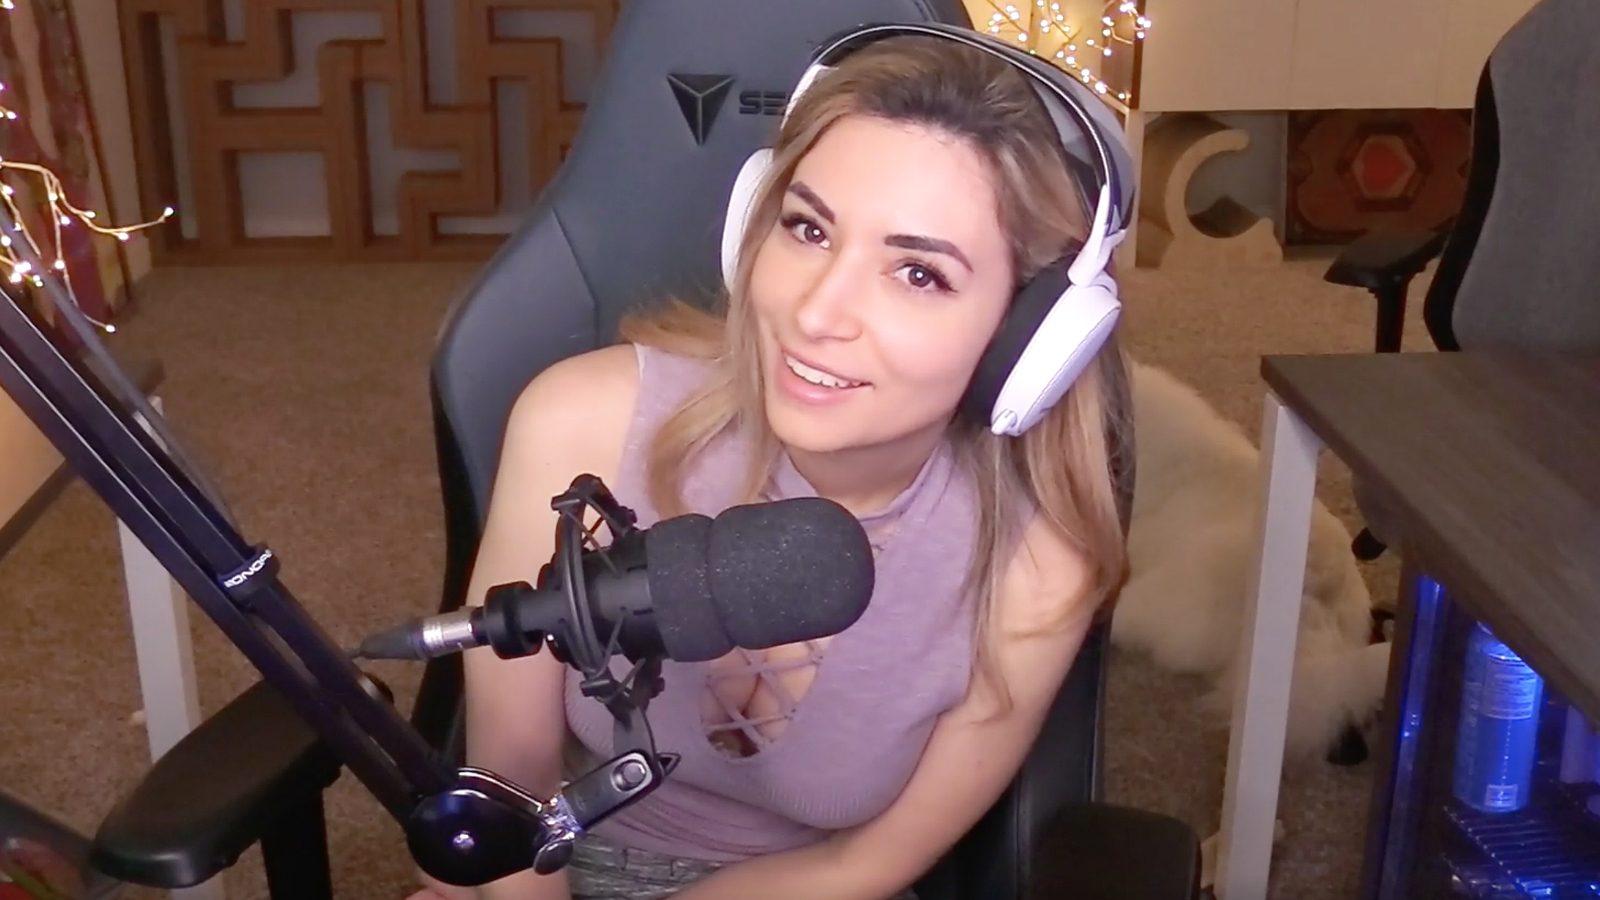 cecille pike add photo alinity dick pic